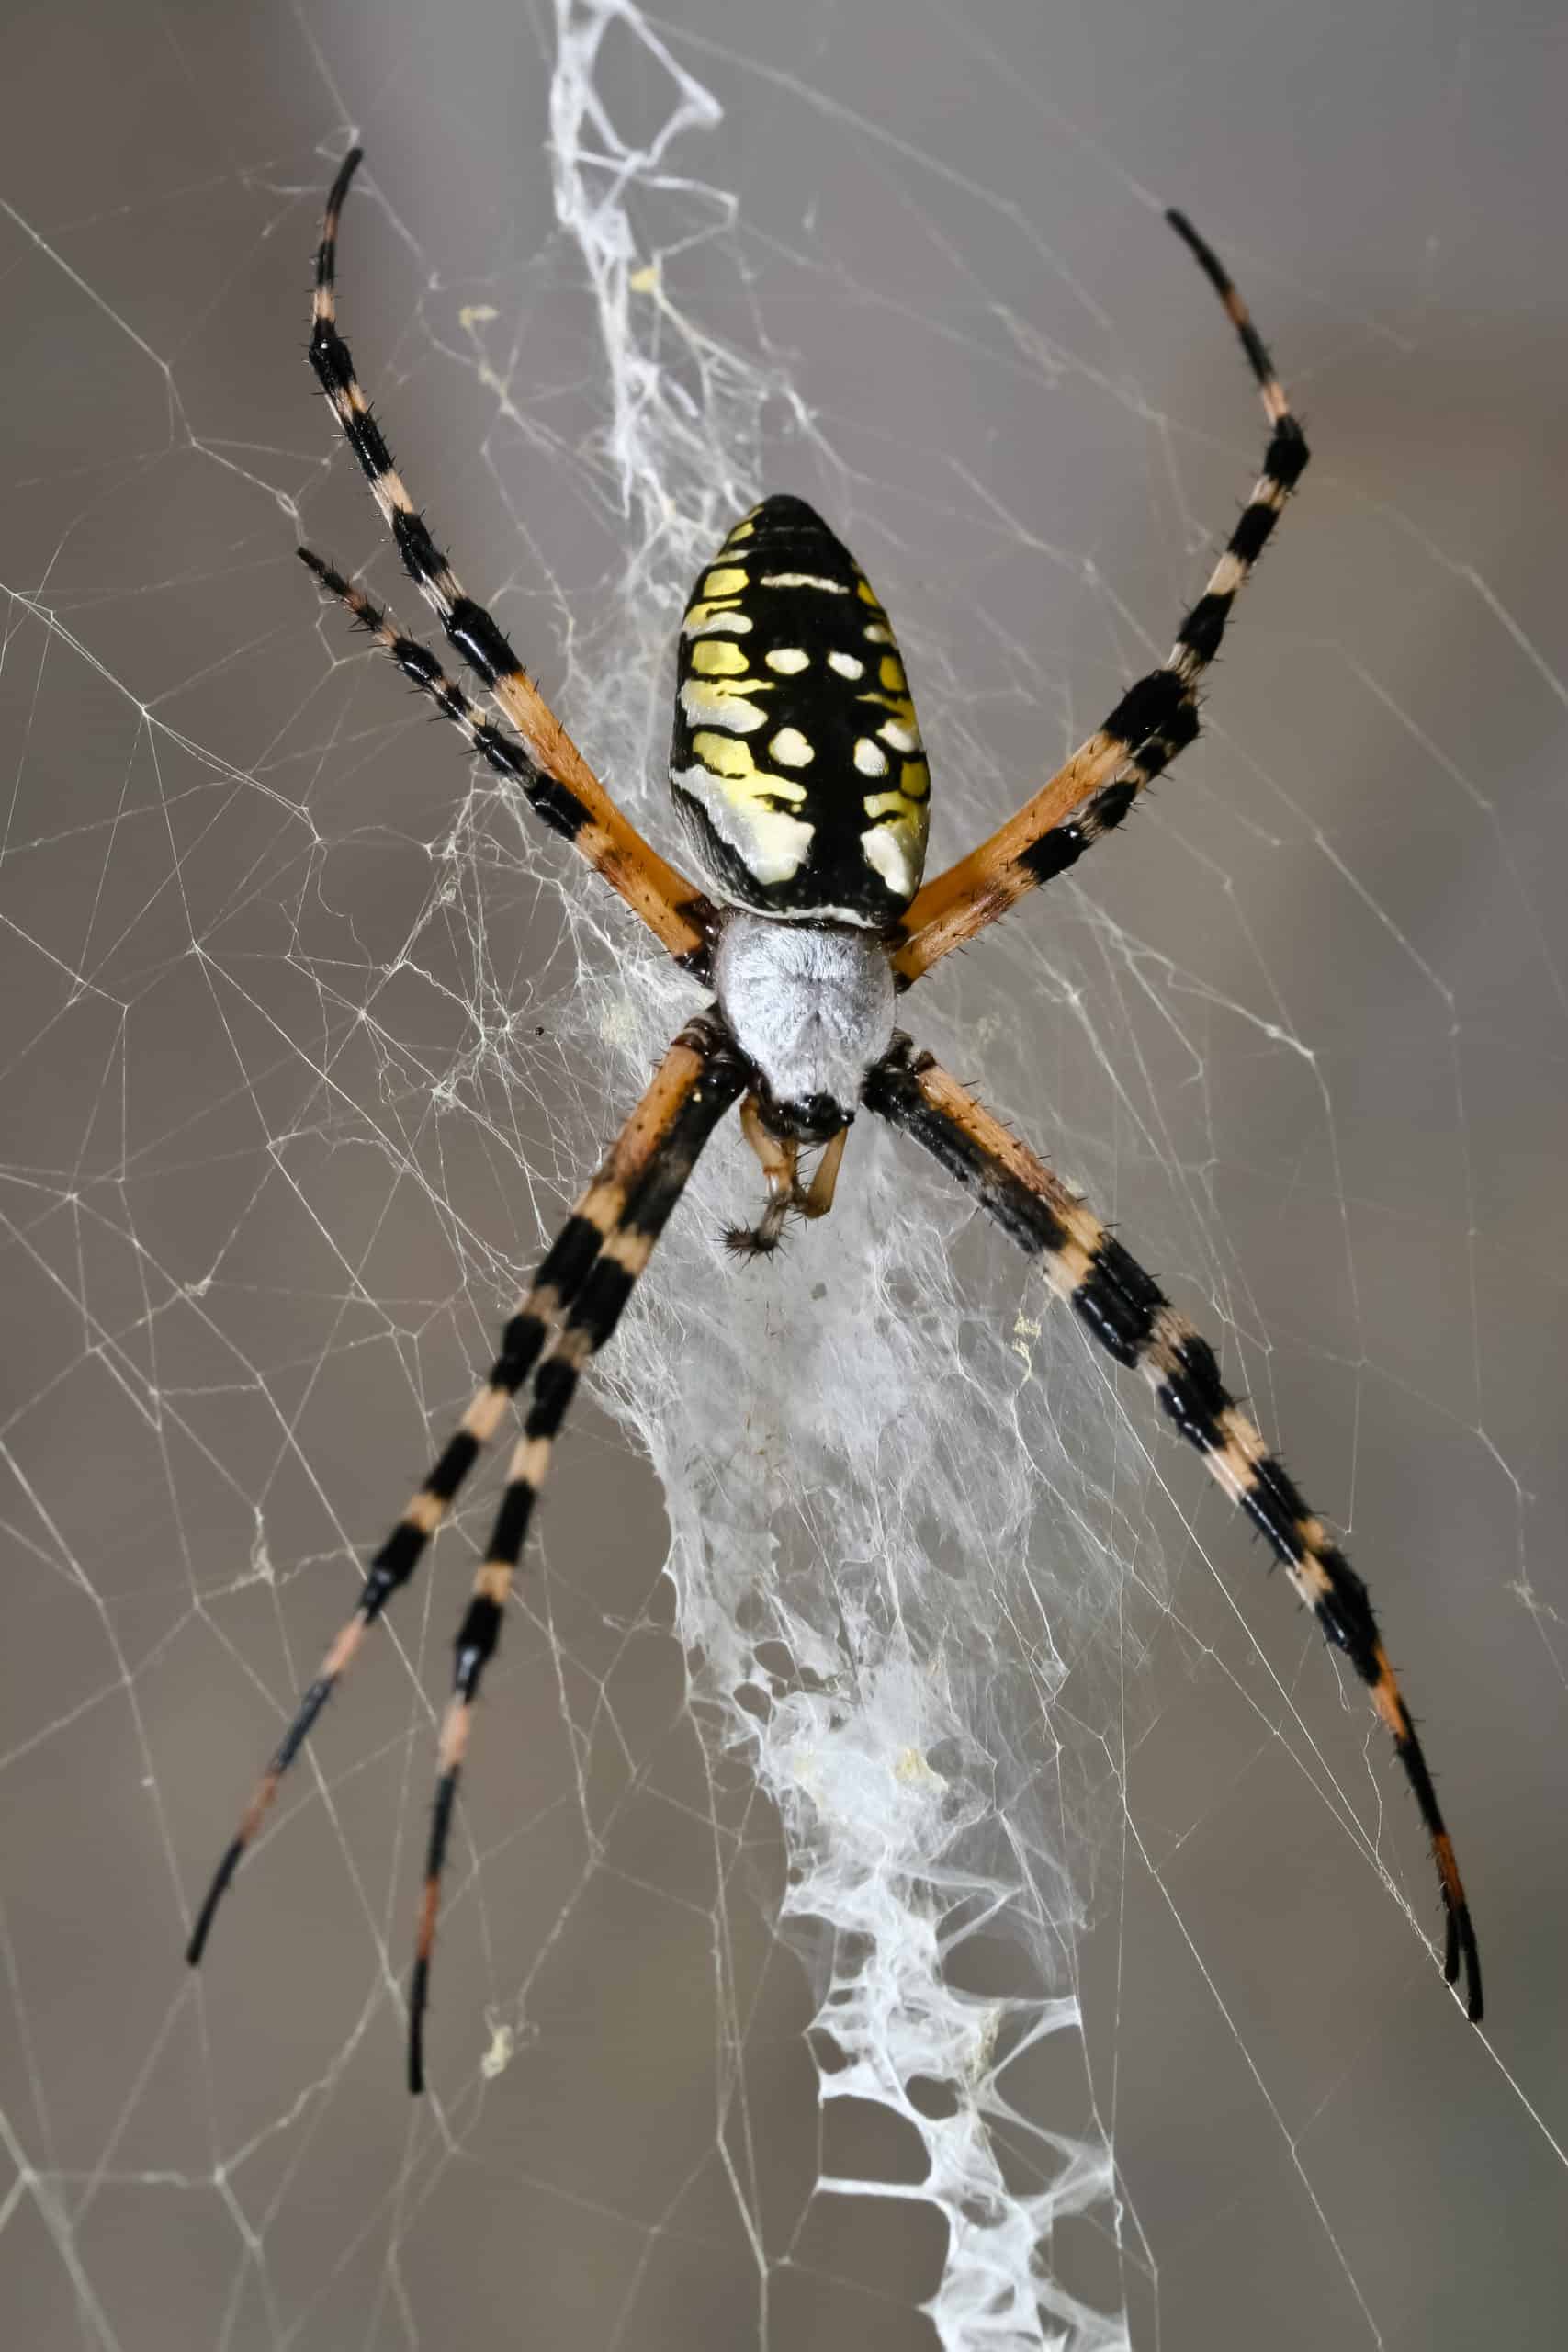 Spider Webs: Identify A Spider By What They Weave